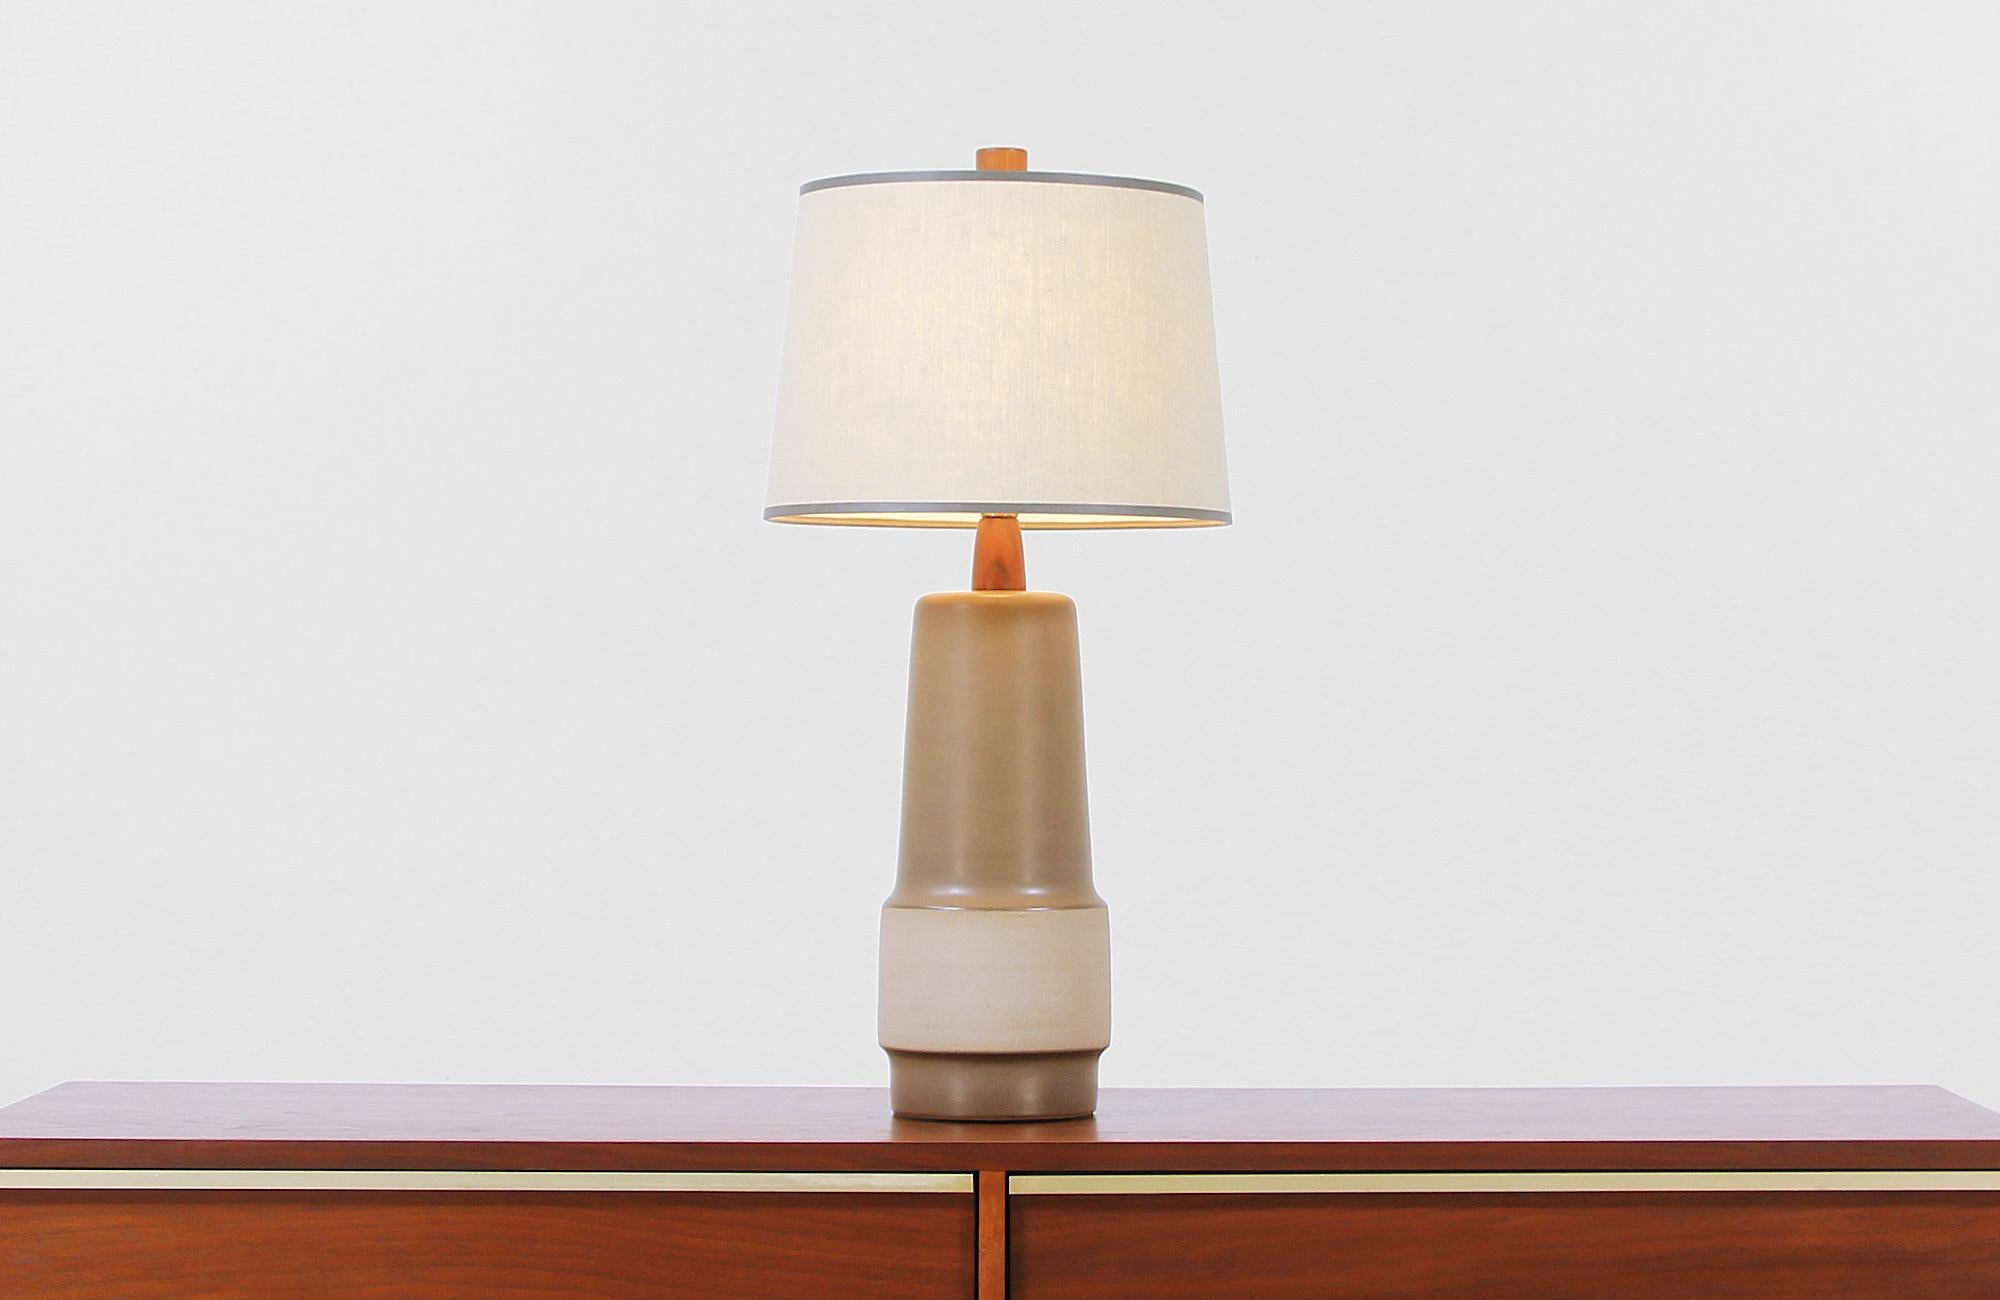 Mid-Century Modern ceramic table lamp designed by Jane & Gordon Martz for Marshall Studios in the United States, circa 1960s. This tall and elegant table lamp features a two-toned glazed ceramic body with walnut wood details creating a contrast of